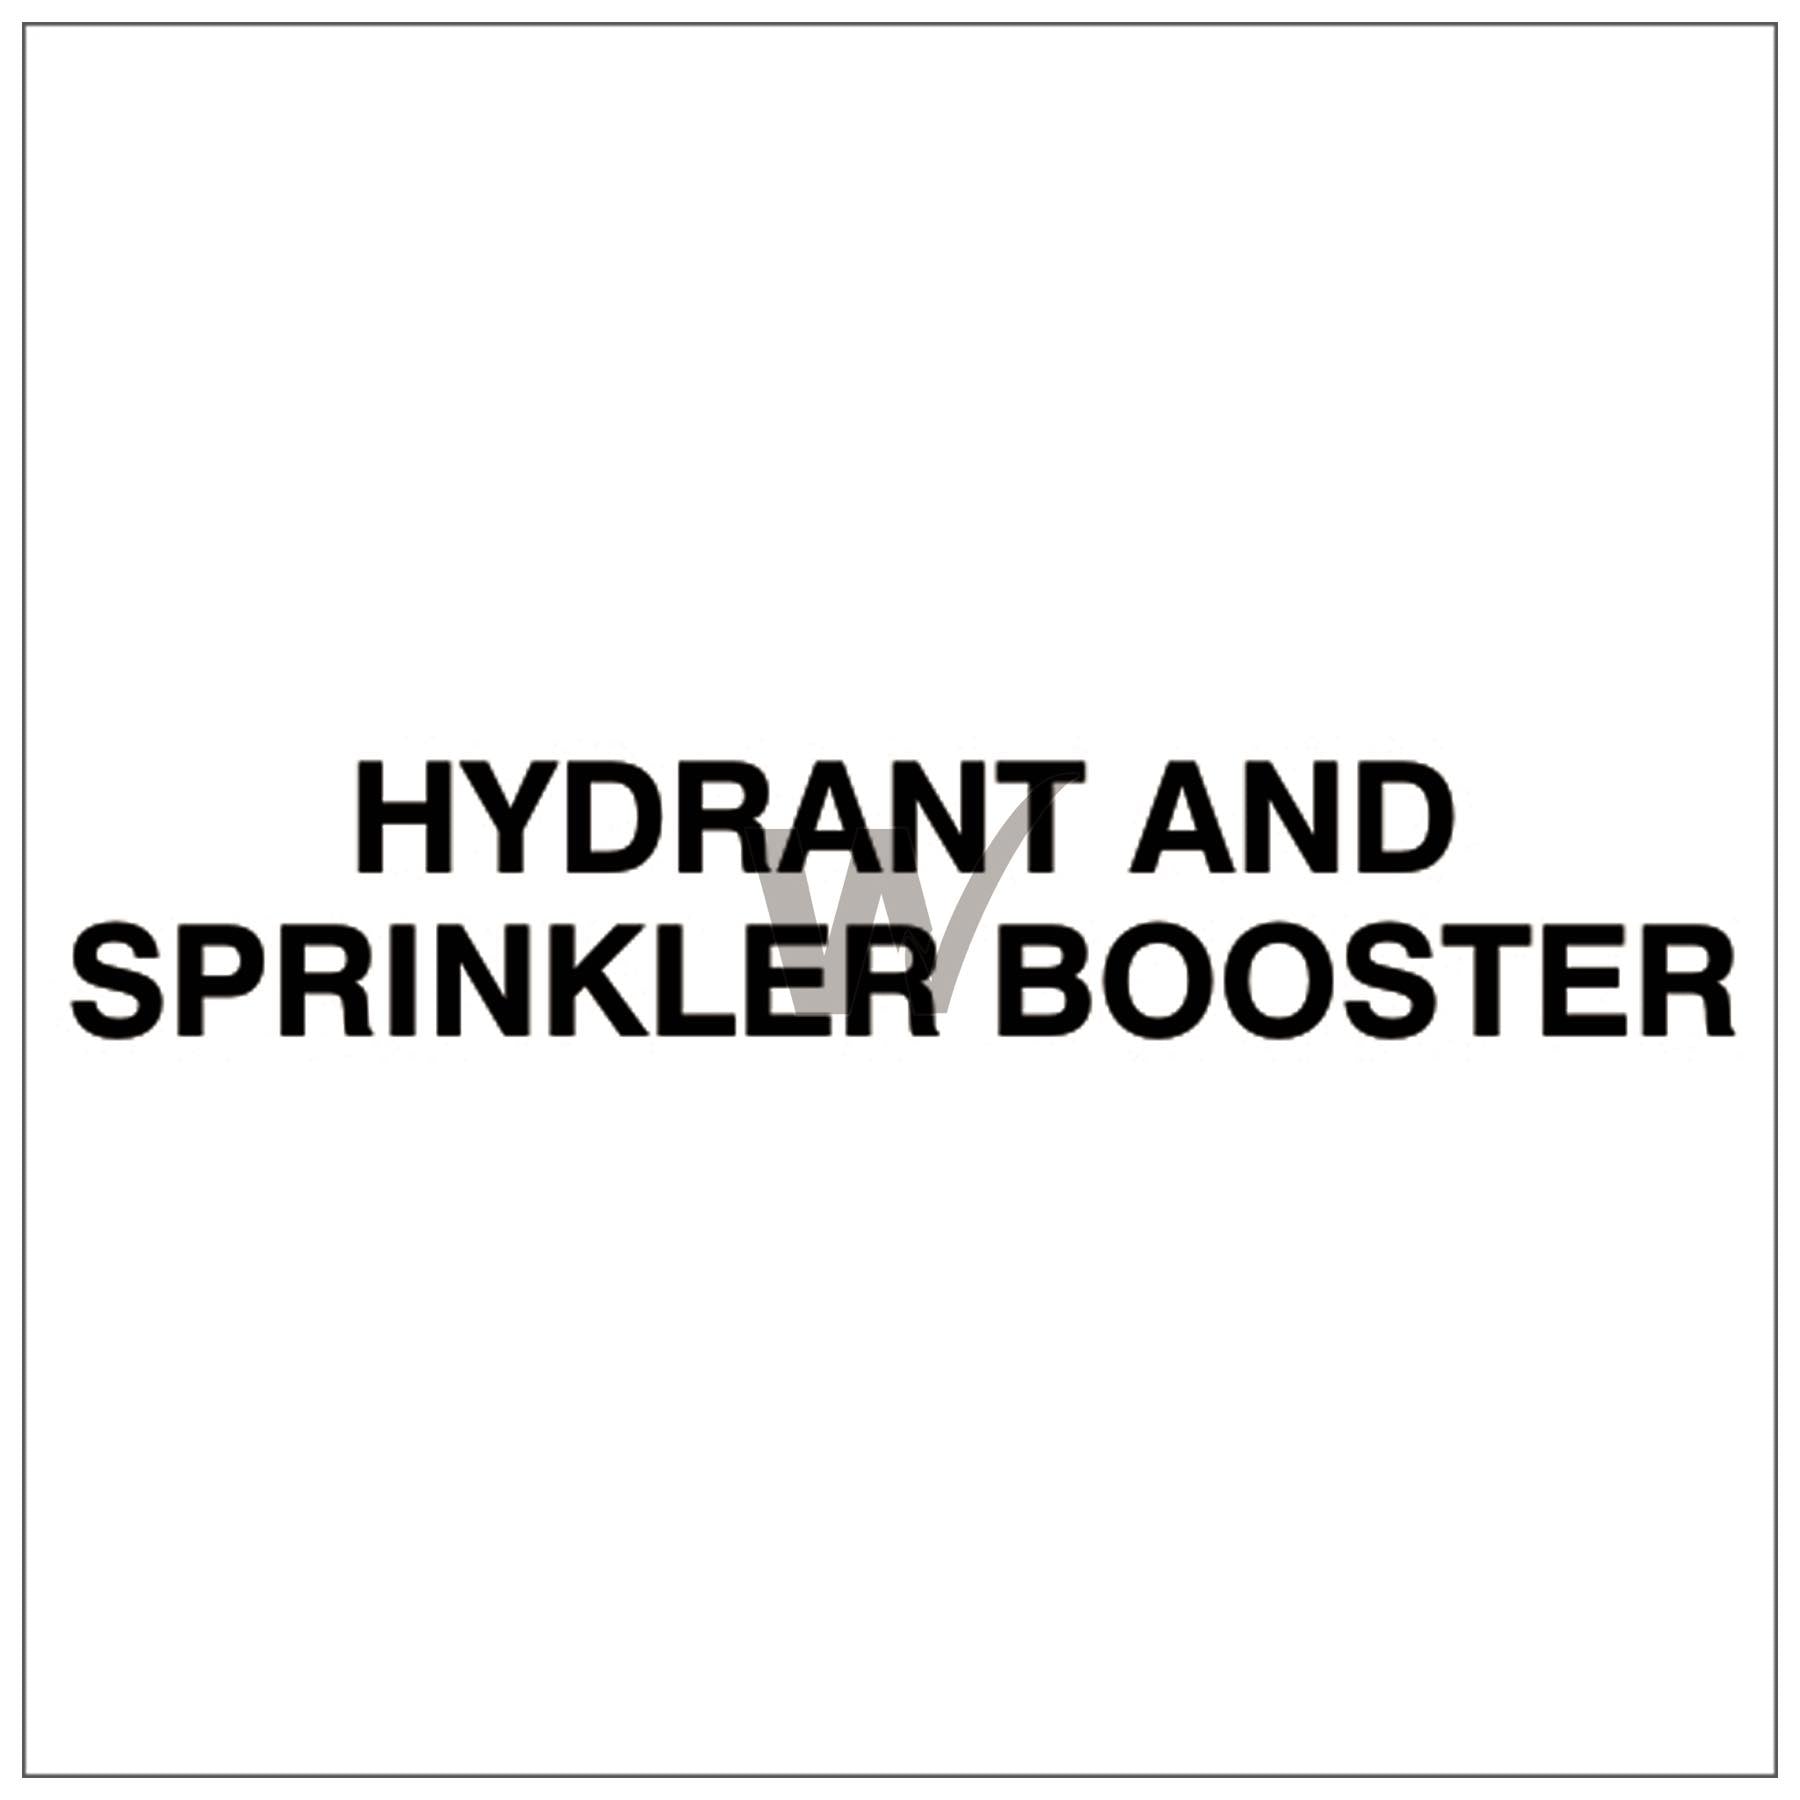 Fire Door Text - Hydrant And Sprinkler Booster